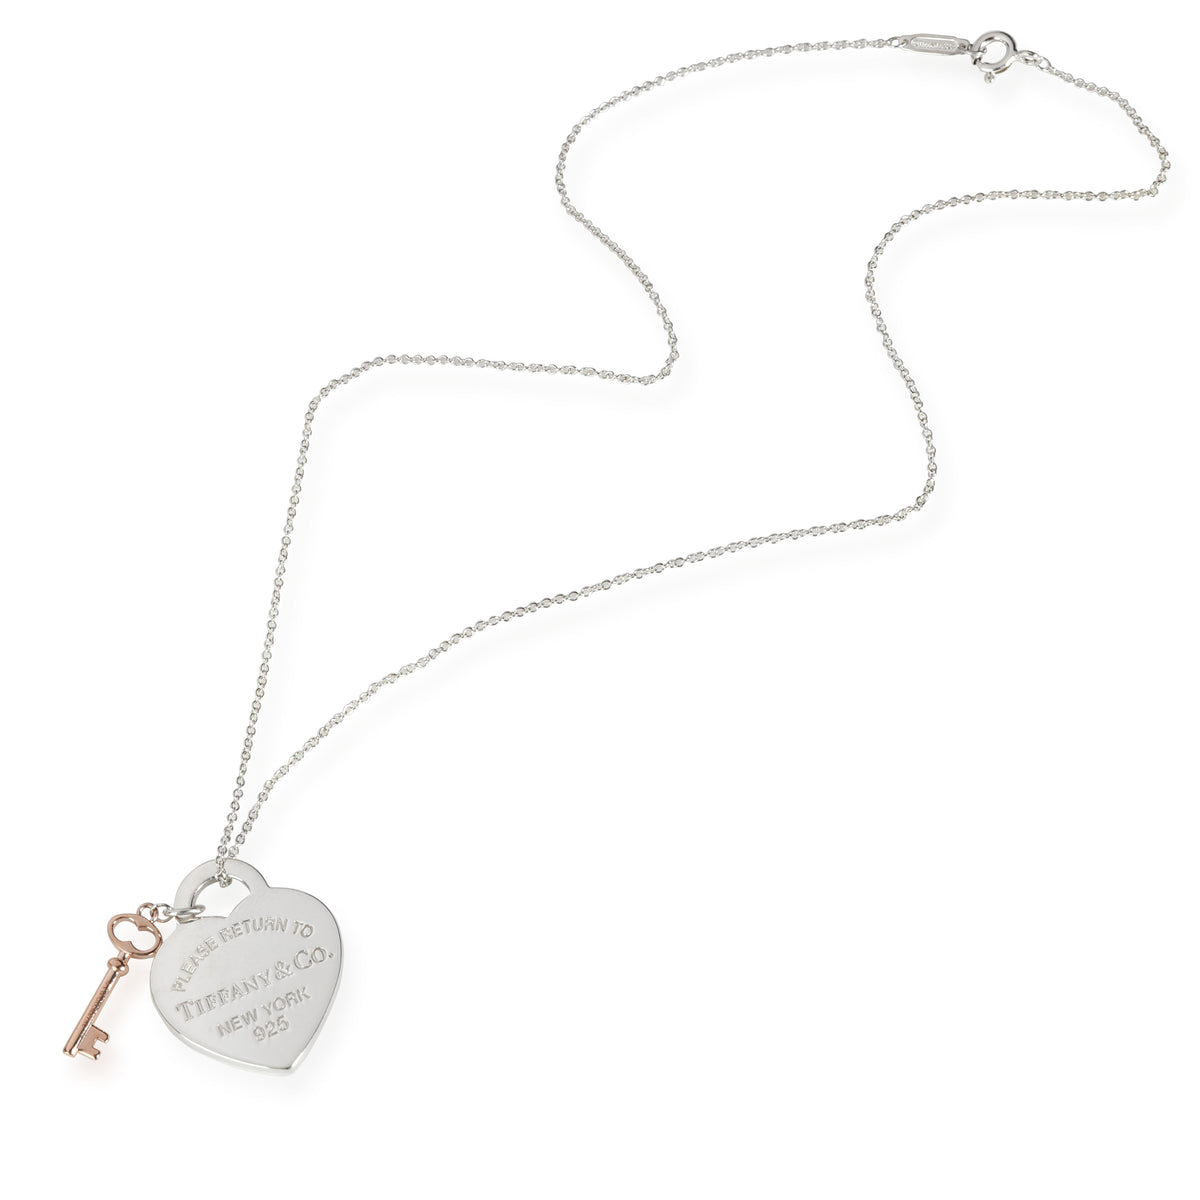 Return to Tiffany Heart Tag Key Pendant in  Sterling Silver and Rubedo